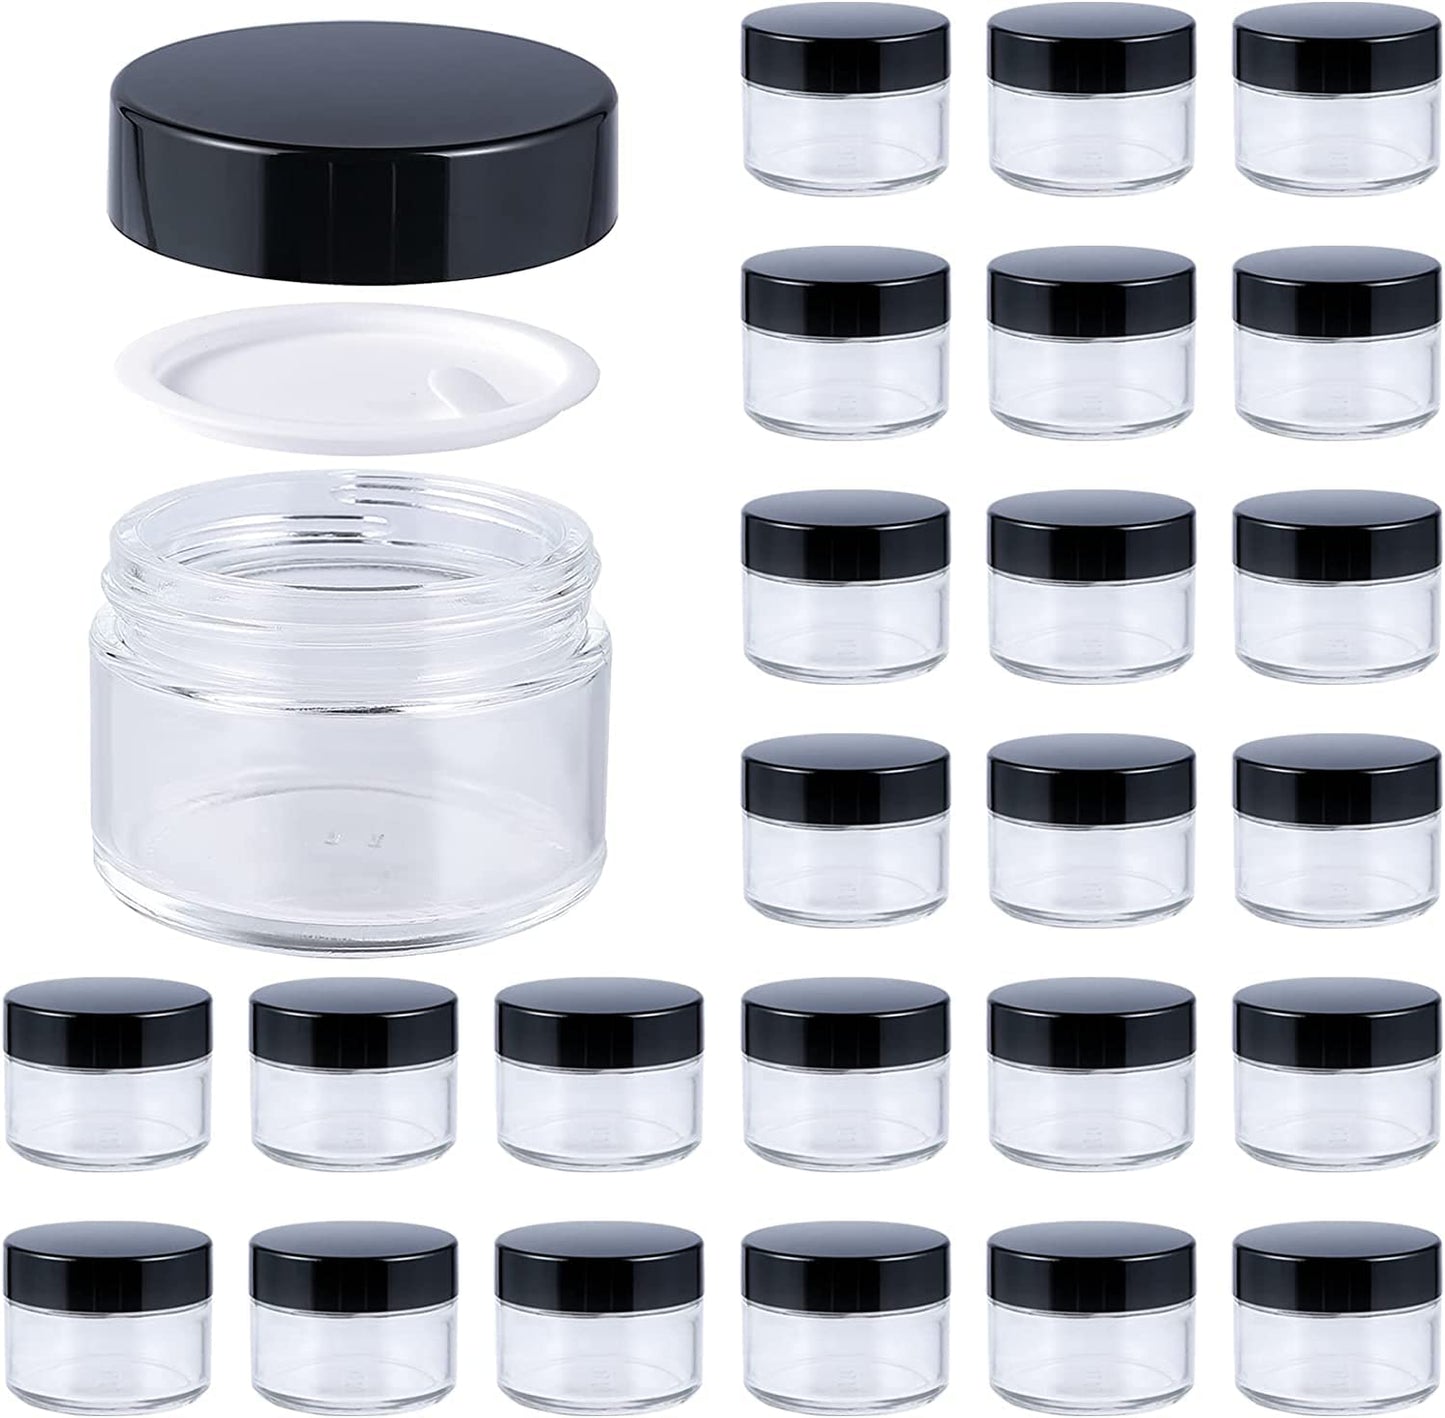 Hunky Dory 12pcs 15grams PS Acrylic Transparent with Black Cap with LID Cosmetics Container for Creams,Lip Balm, Body Butter, Essential oil, Costemic, Makeup, Travel Use